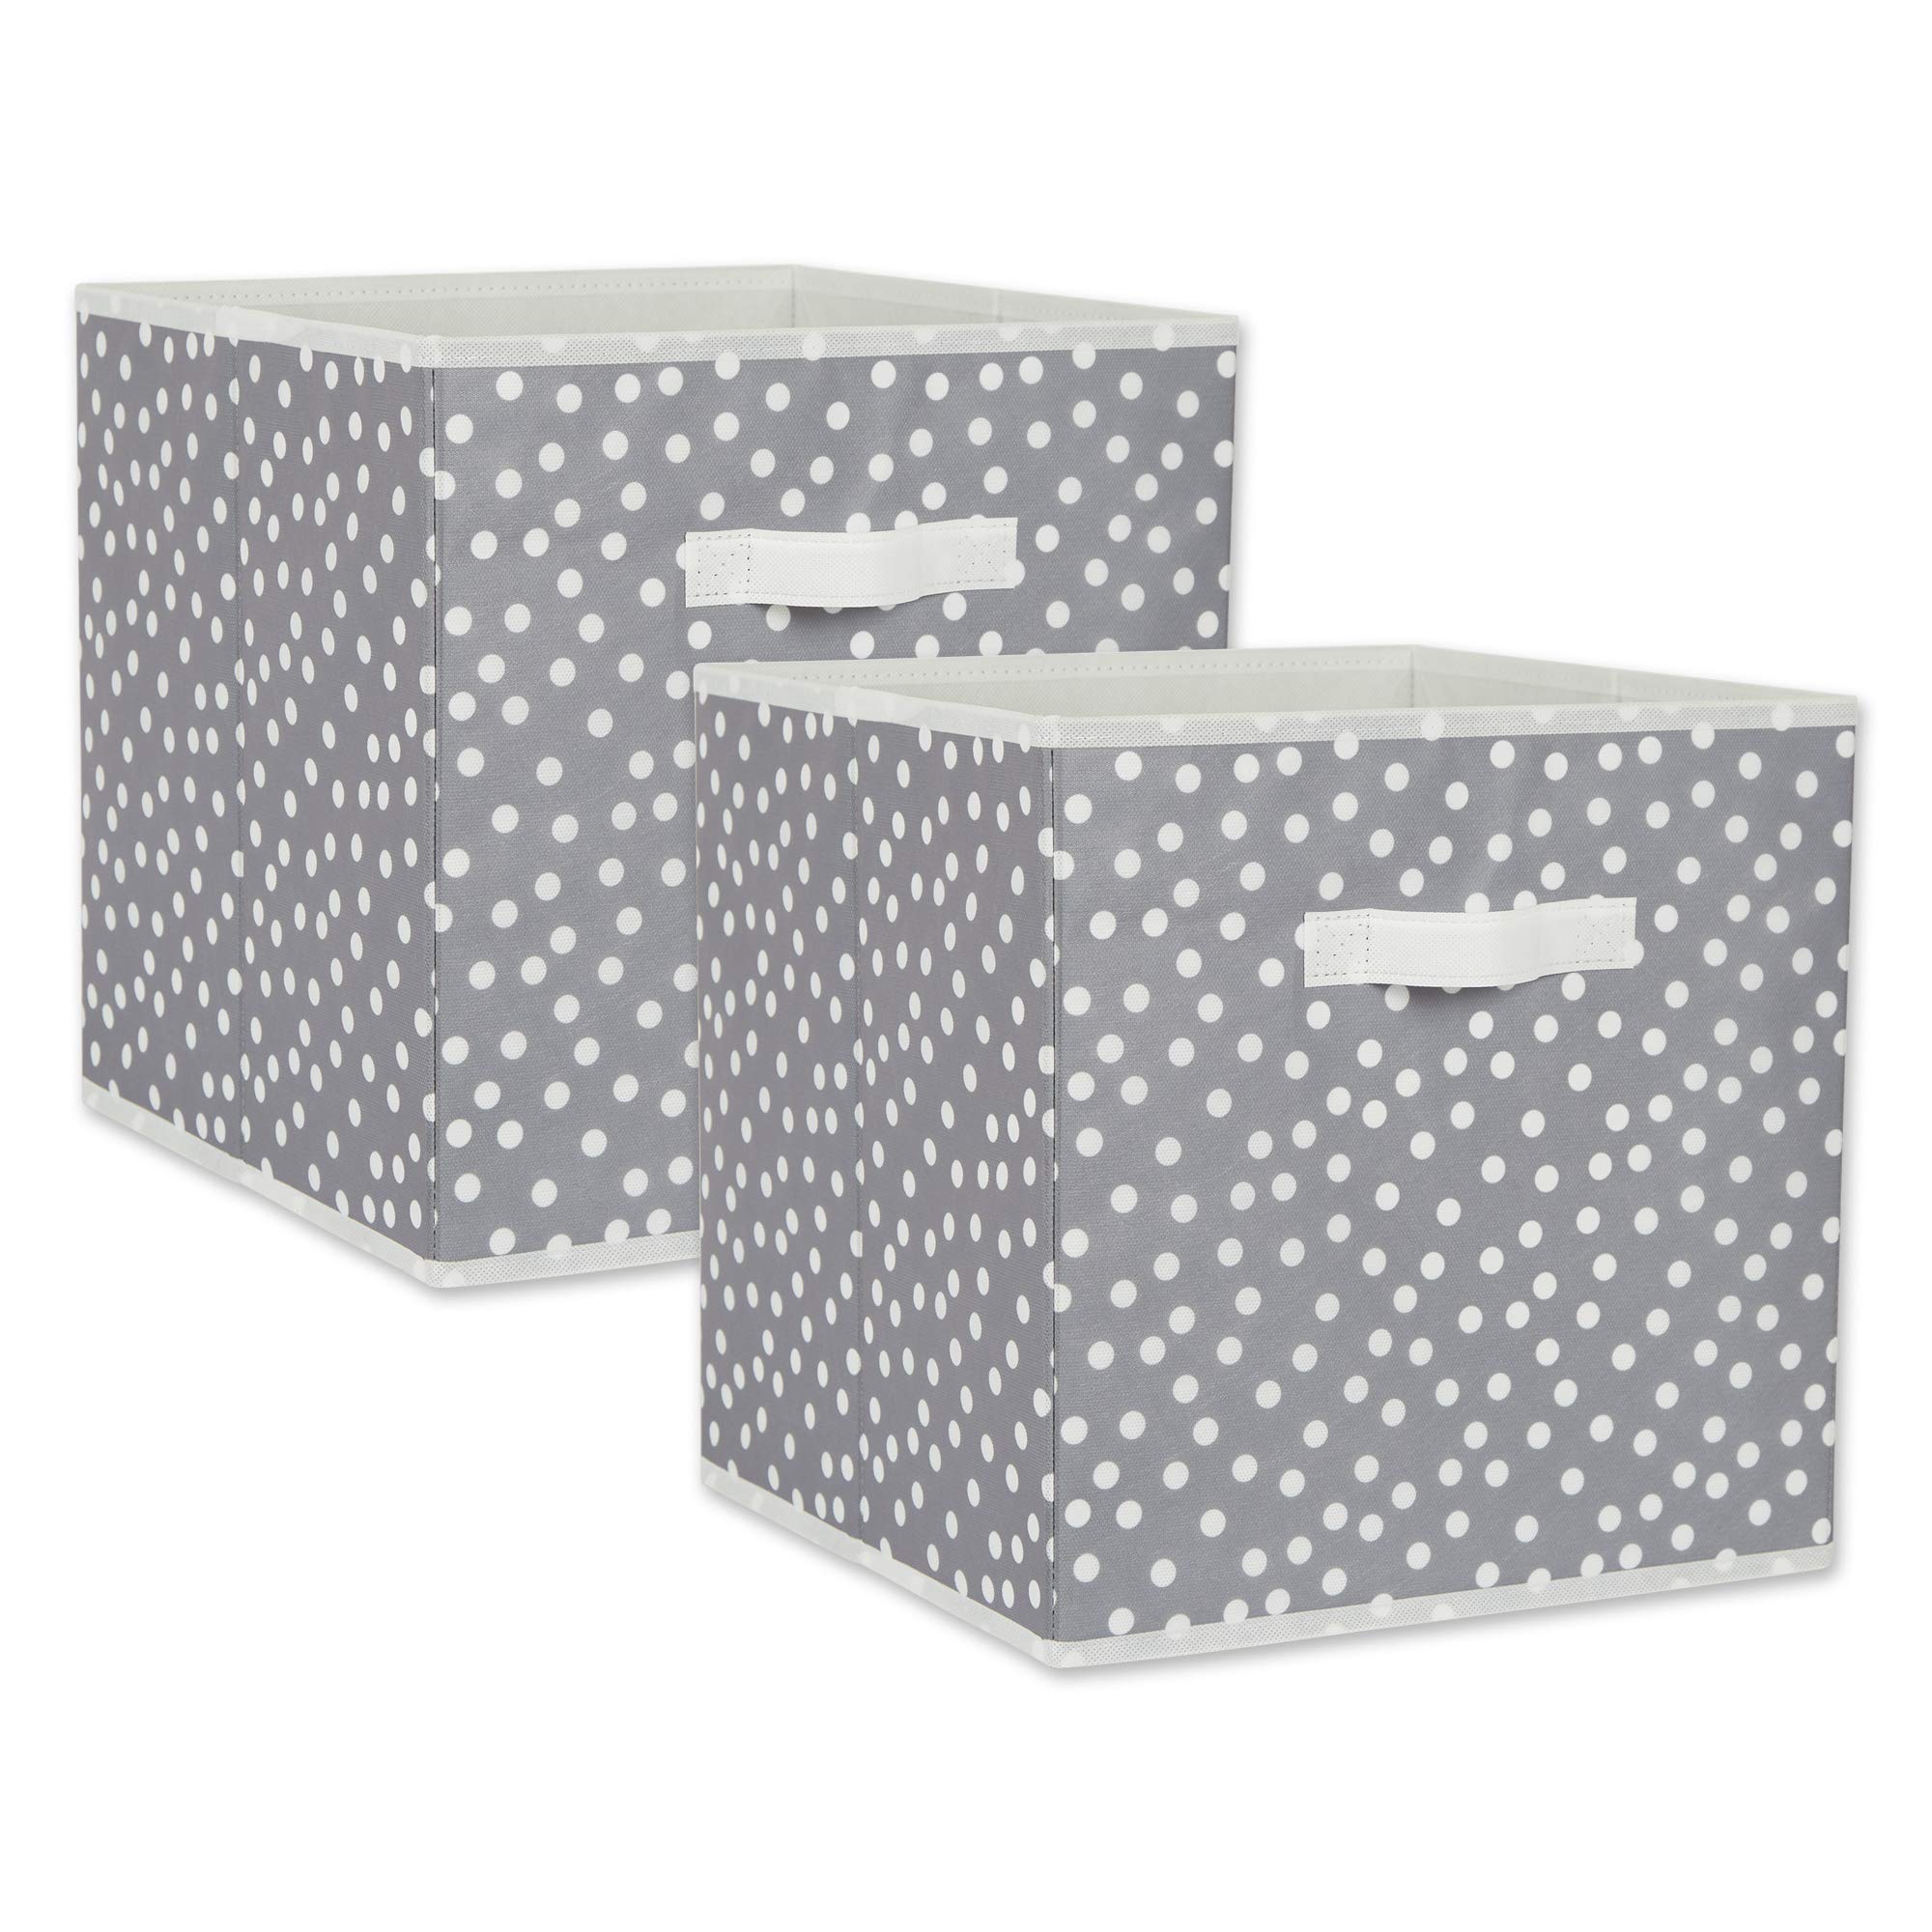 2-Pack 13" Cubed DII Polka Dot Collapsible Bins (Gray & White) $6.80 + Free Shipping w/ Prime or on orders over $35